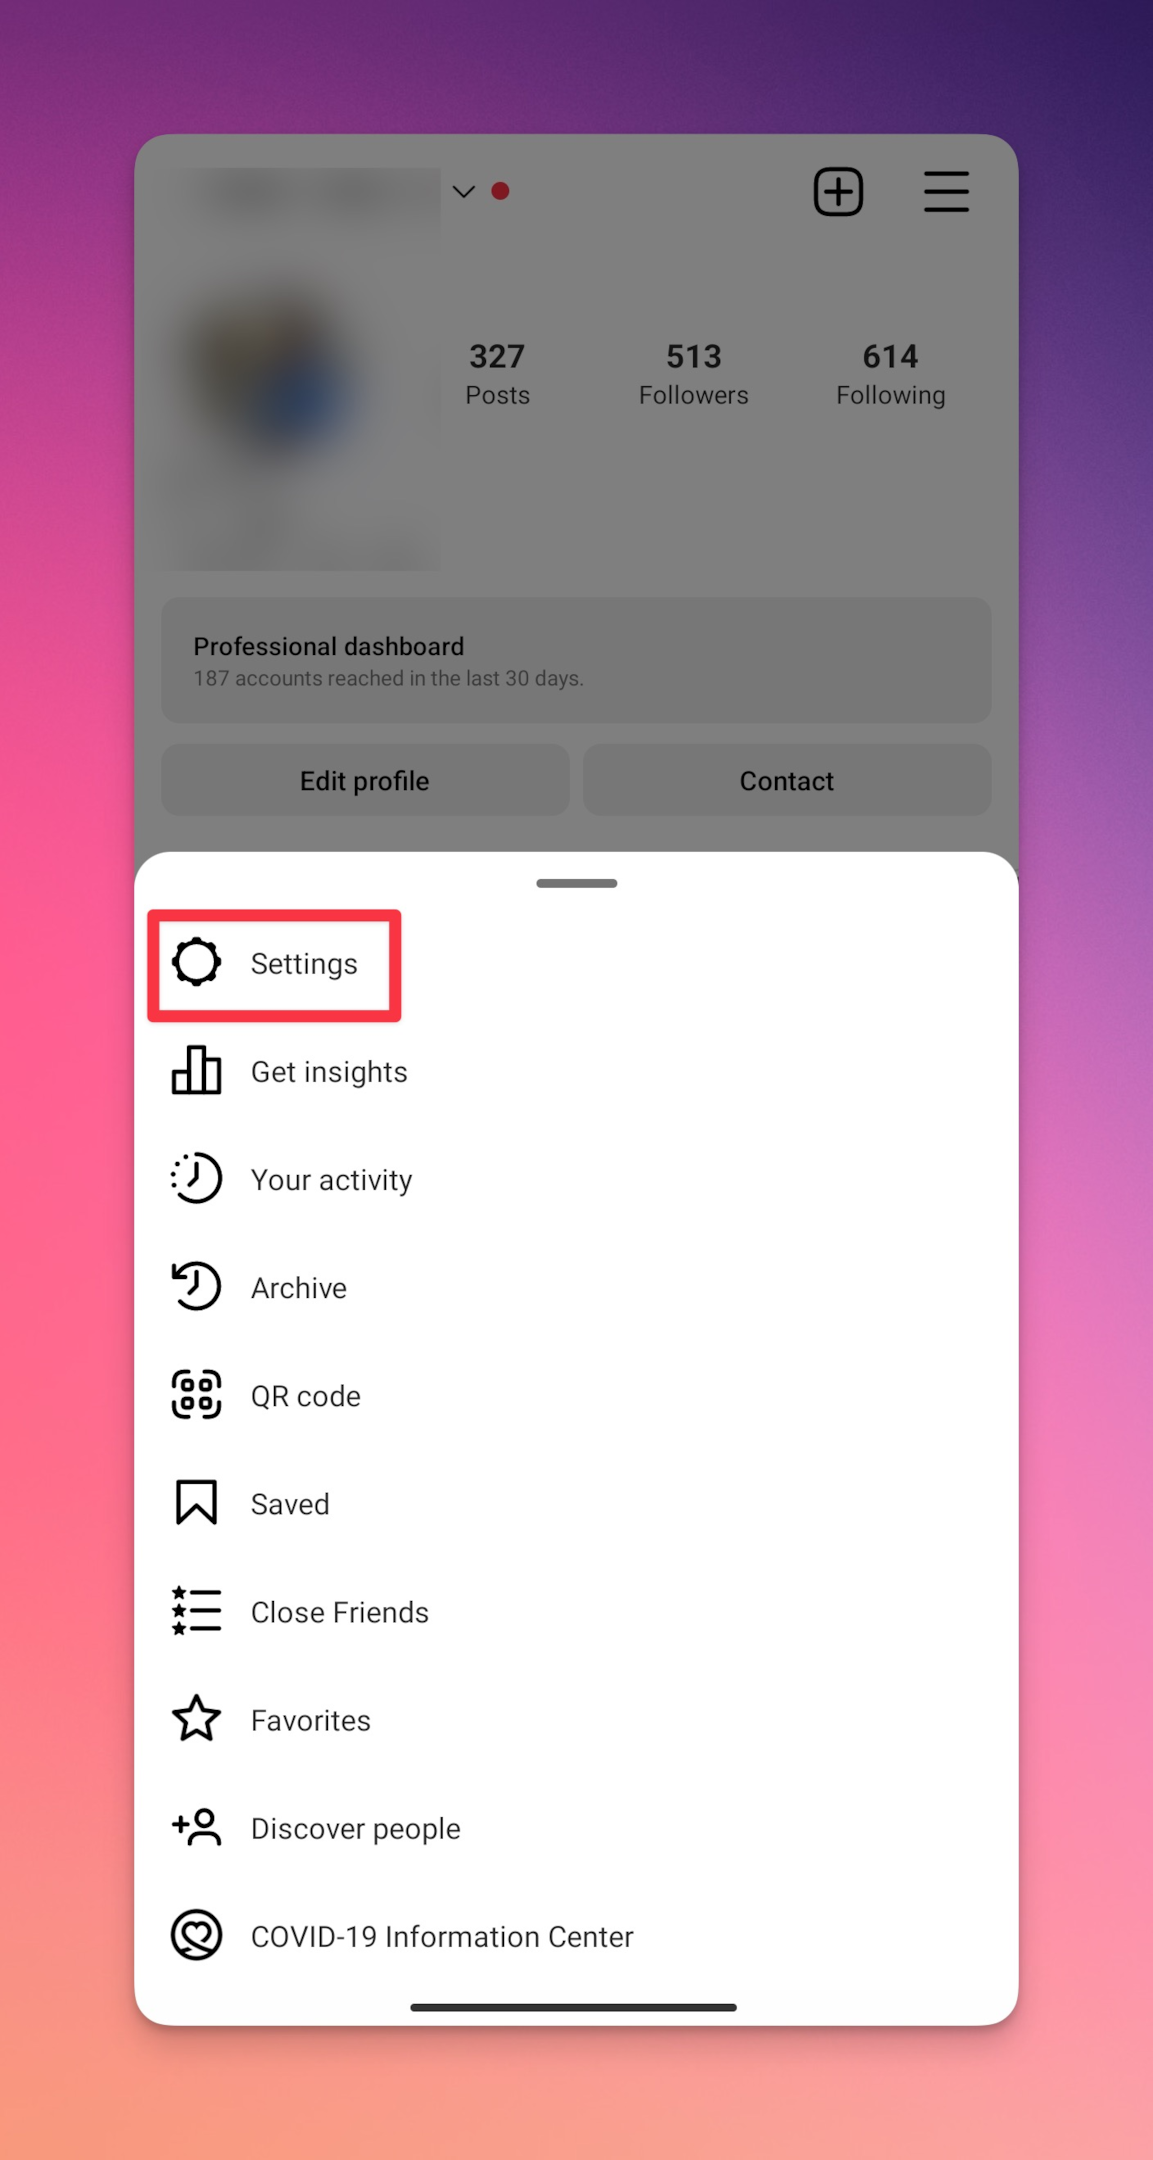 Remote.tools shows to tap on Settings to view reports against your profile